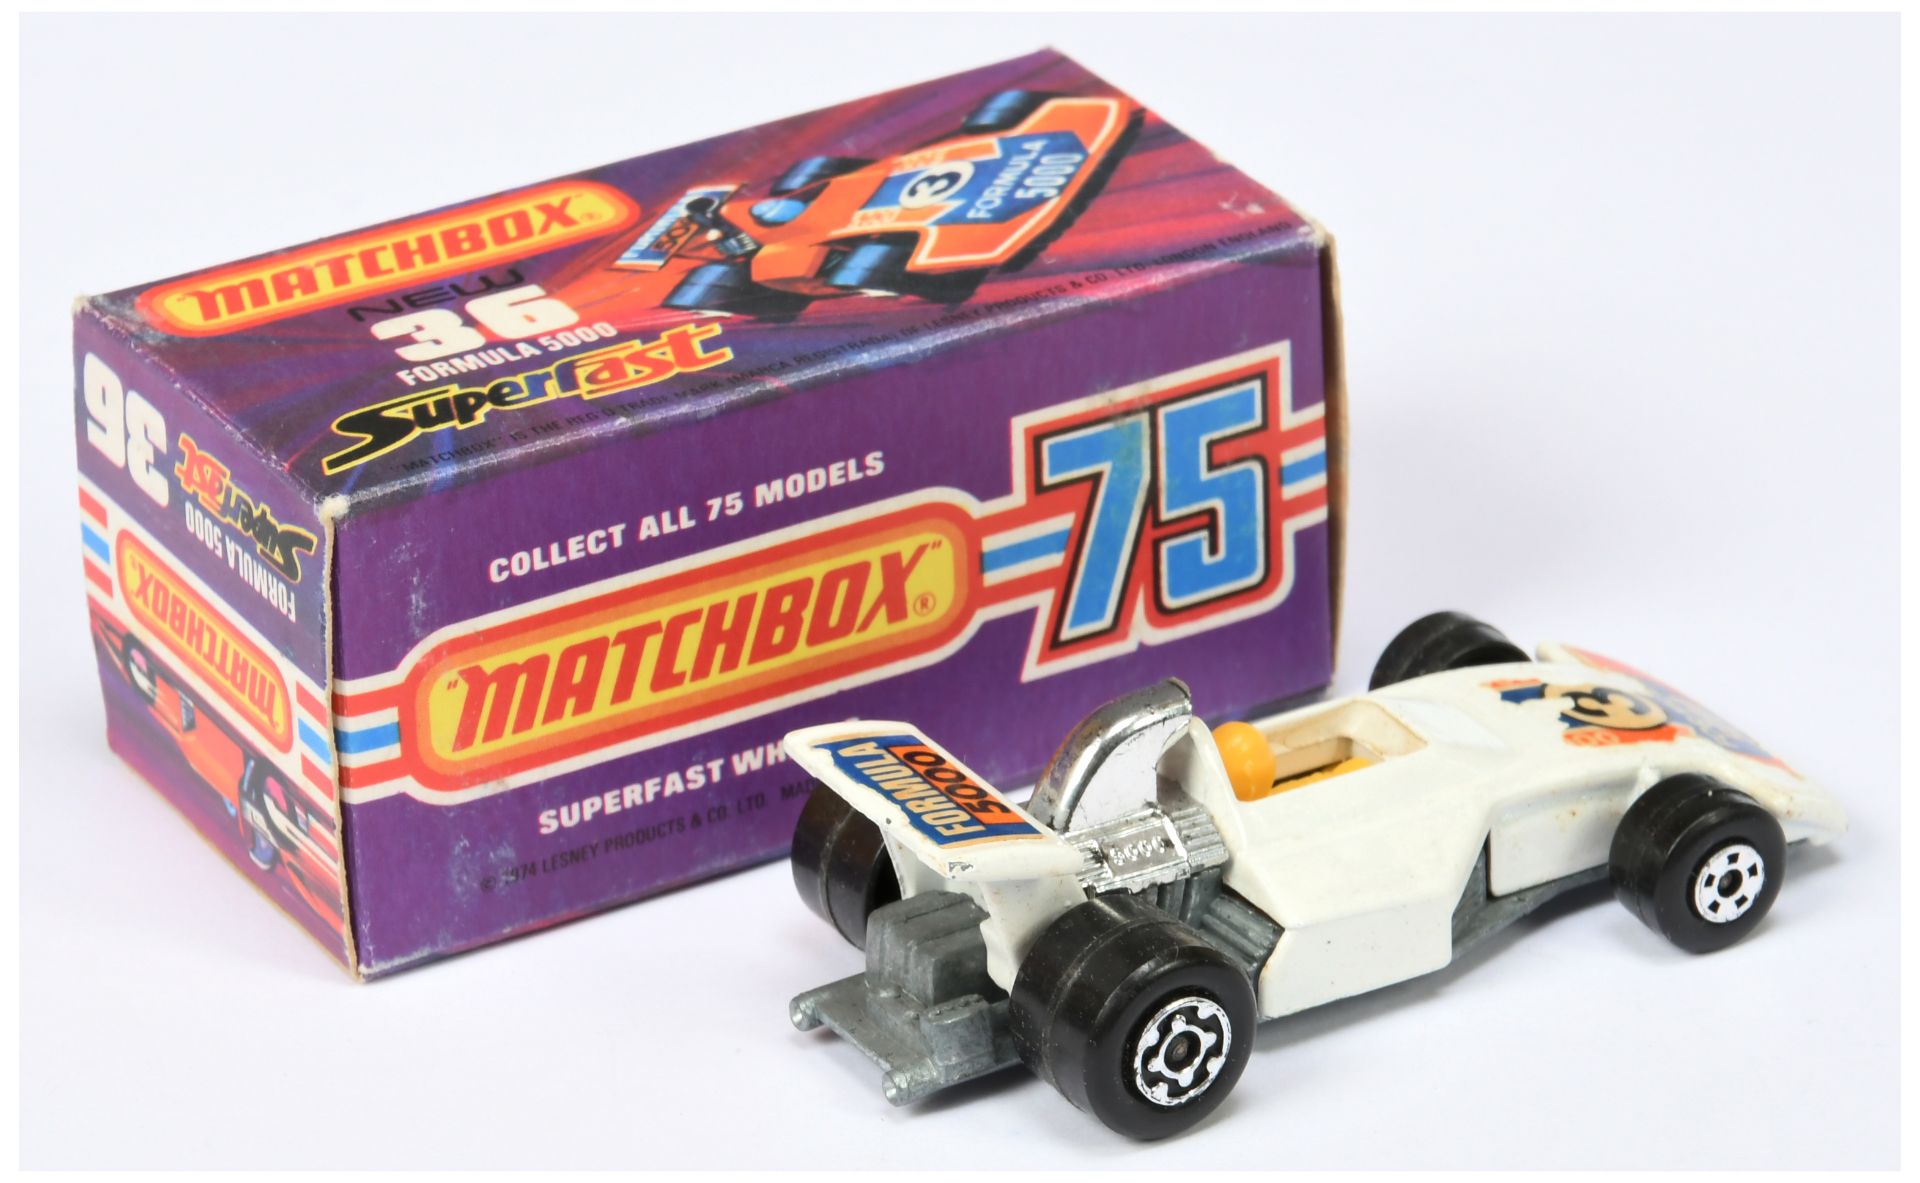 Matchbox Superfast 36c Formula 5000 Racing Car MADE IN BRAZIL ISSUE - Image 2 of 3